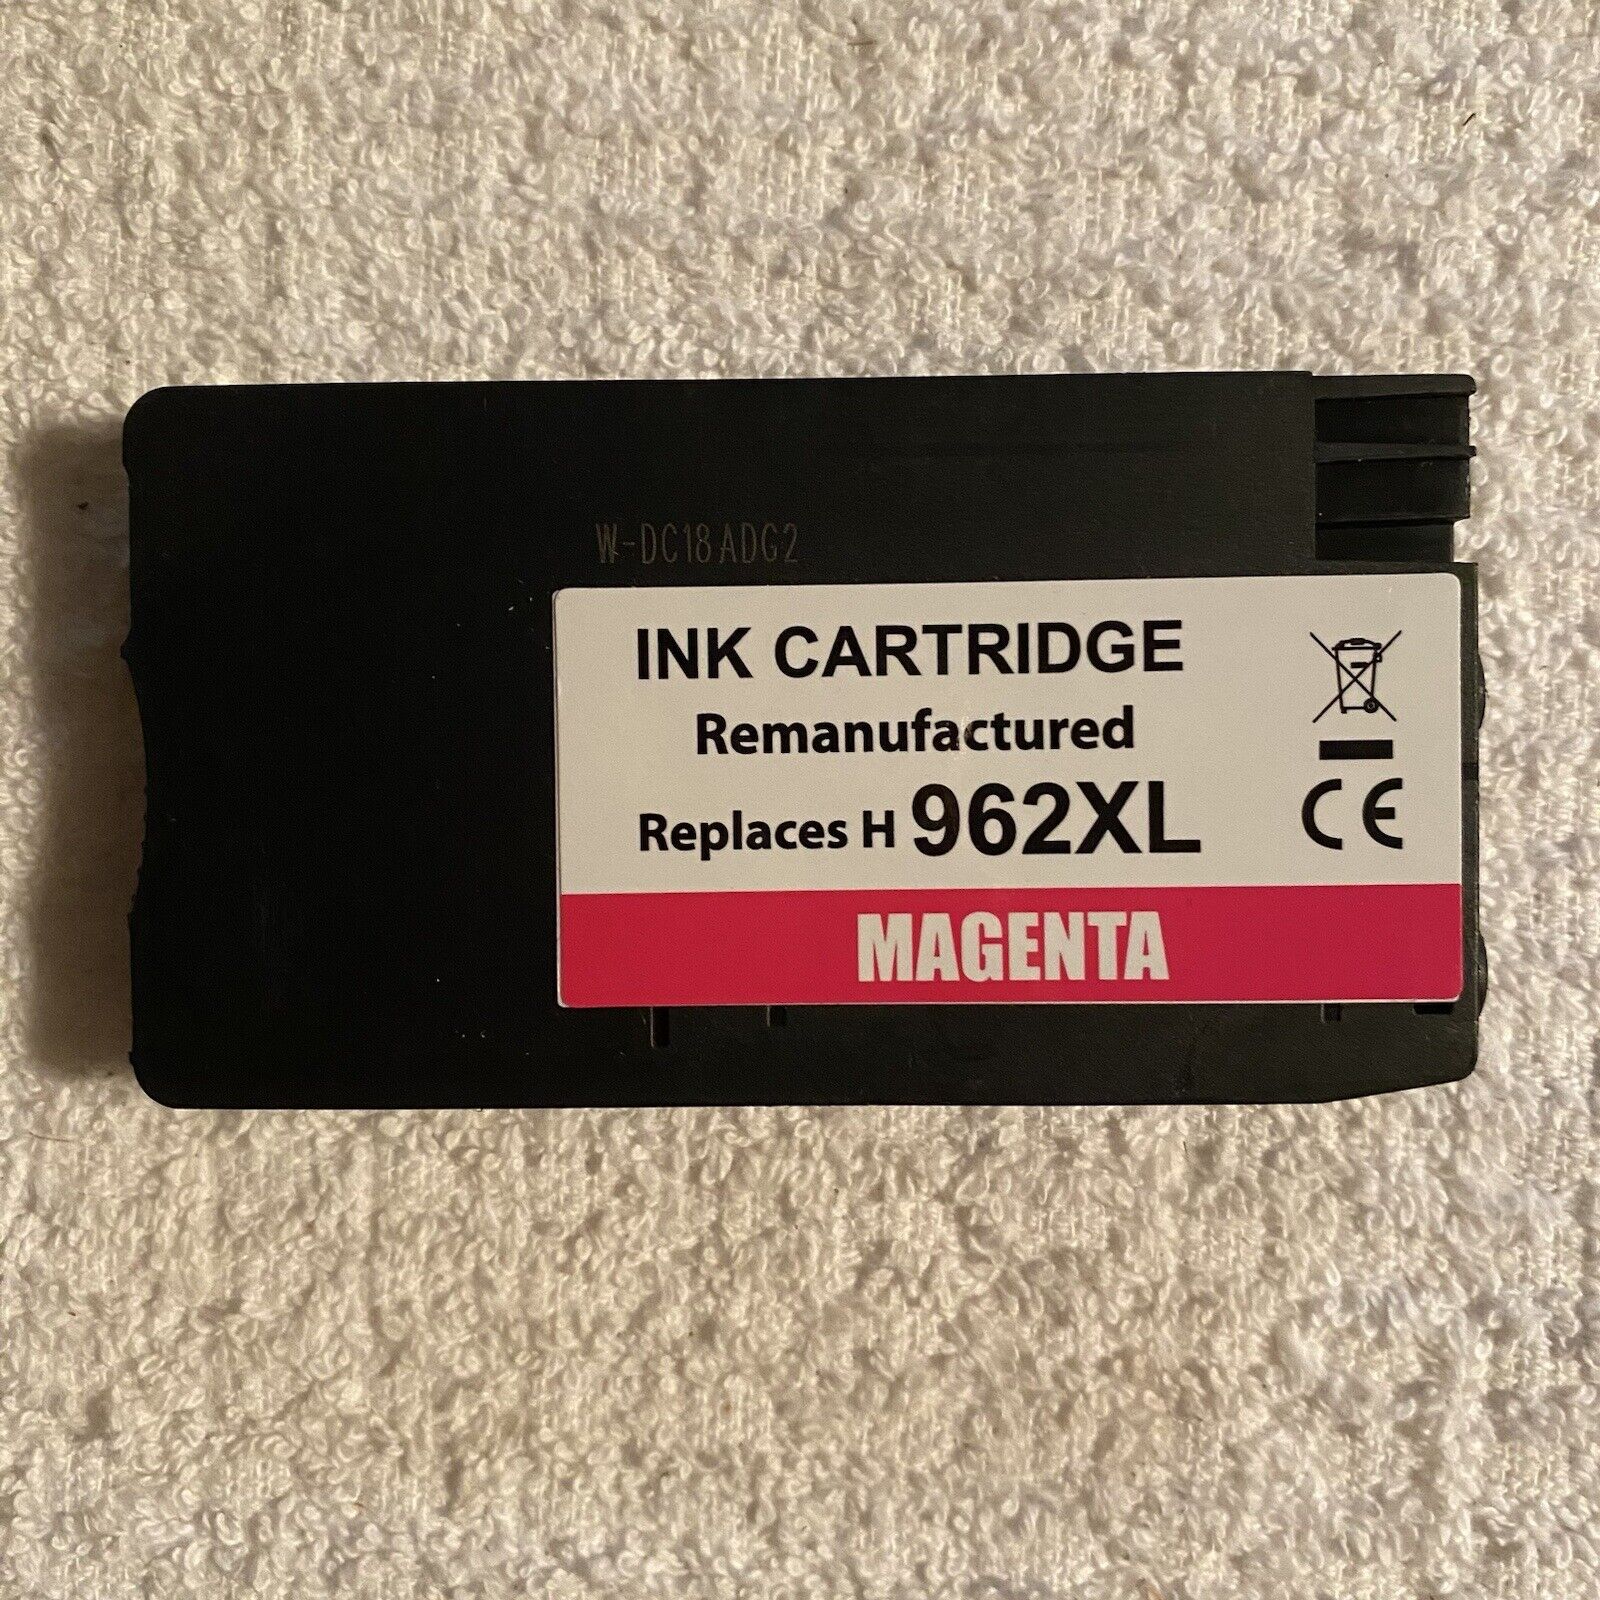 Reman 962 XL Magenta Ink Cartridge for HP Officejet Pro 9010 9012 All-in-One